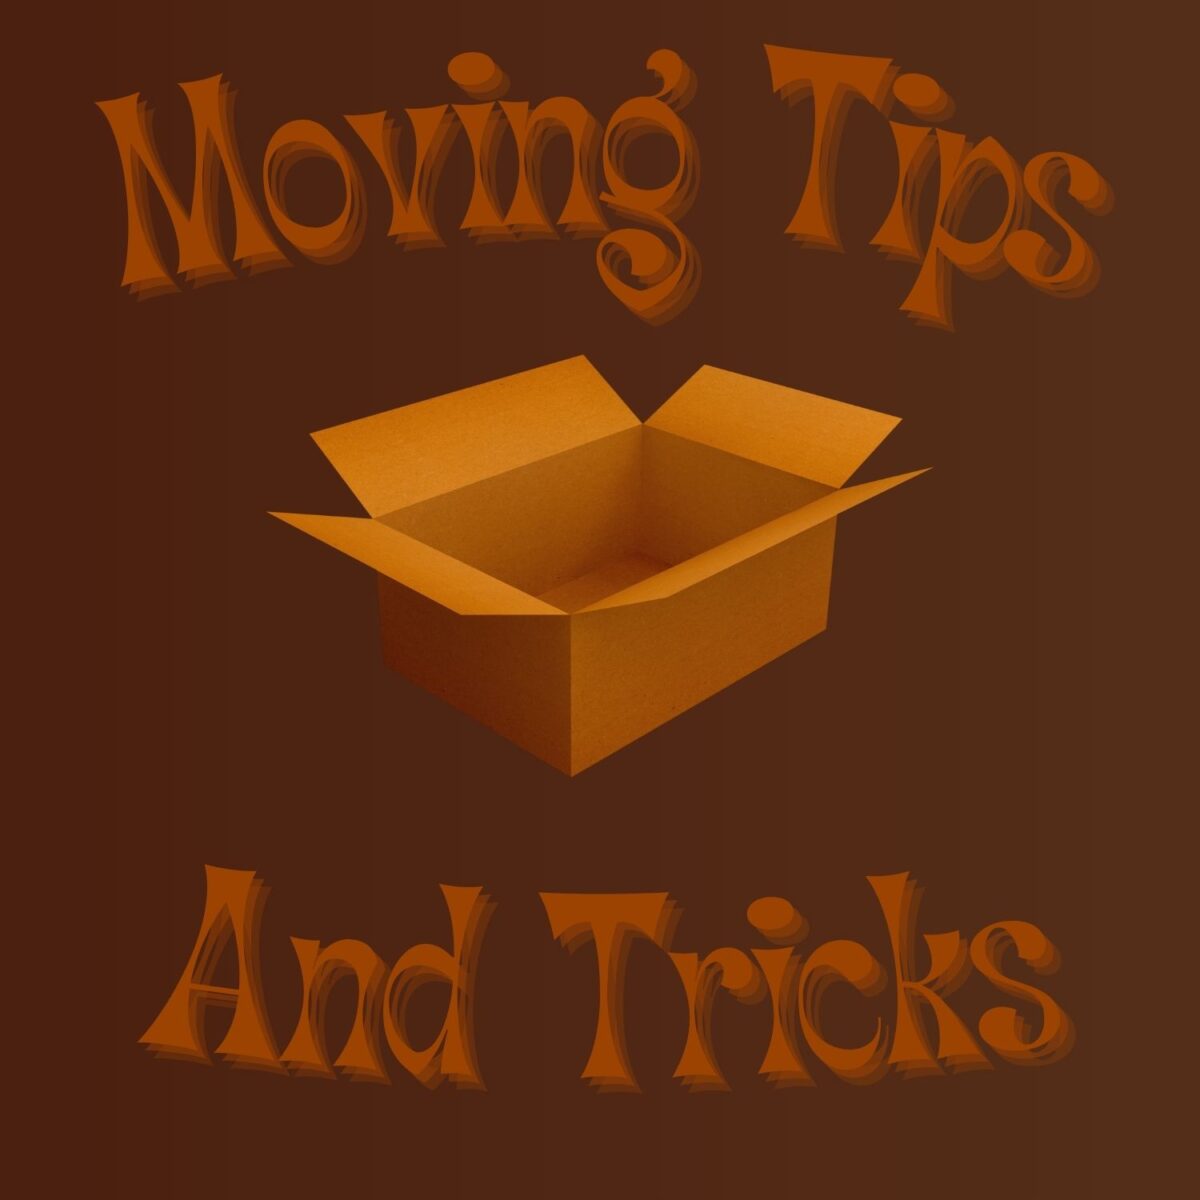 Moving Tips with cardboard box